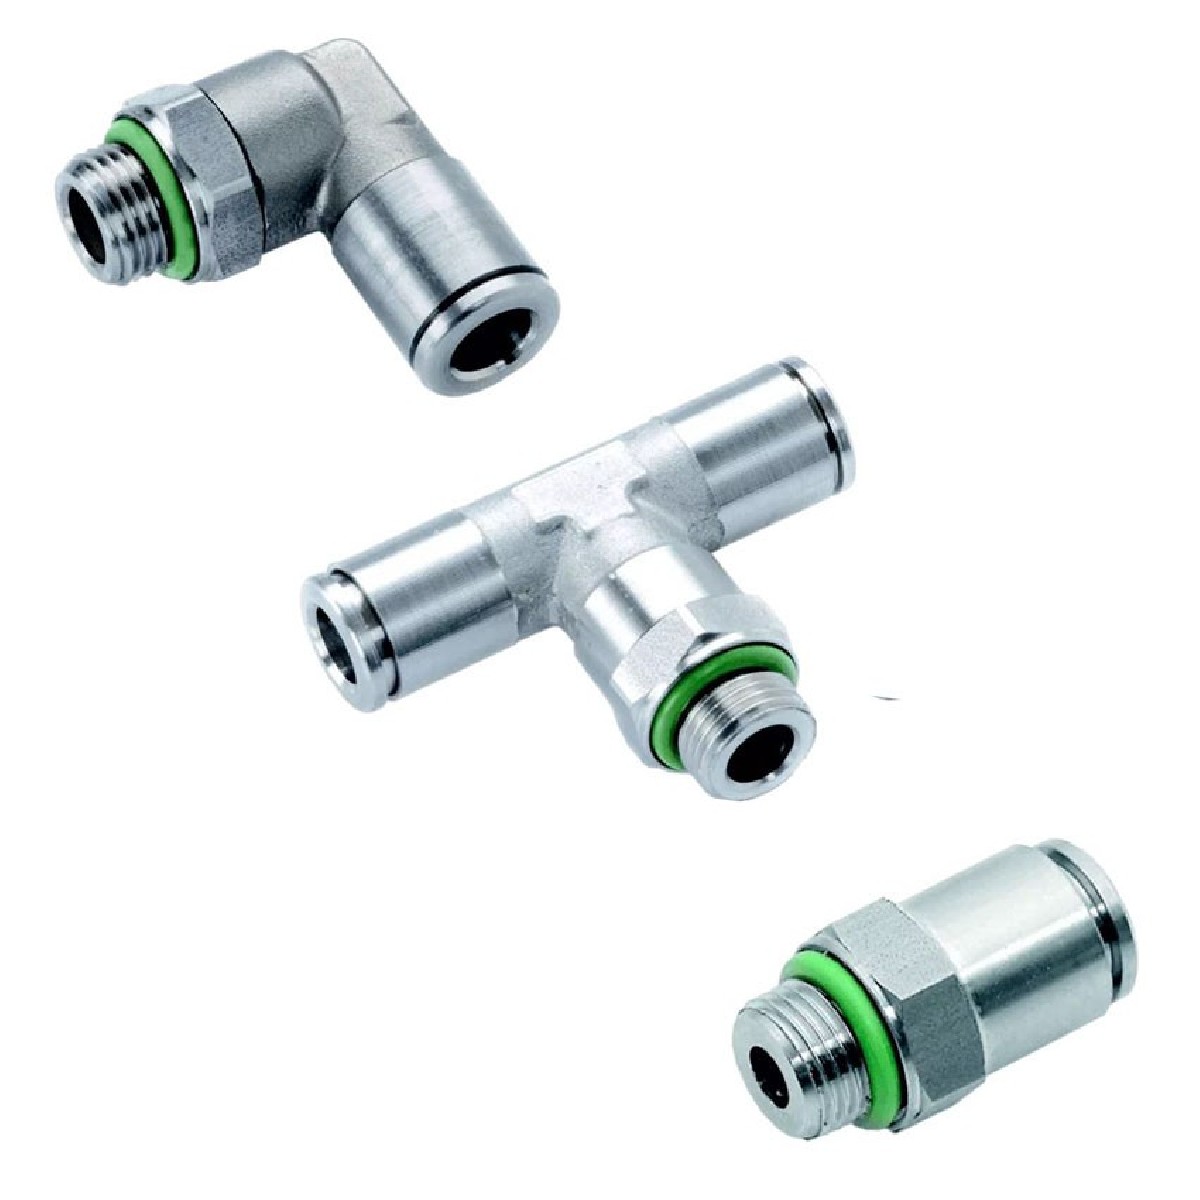 Pneumatic fittings in stainless steel from Davair Ireland